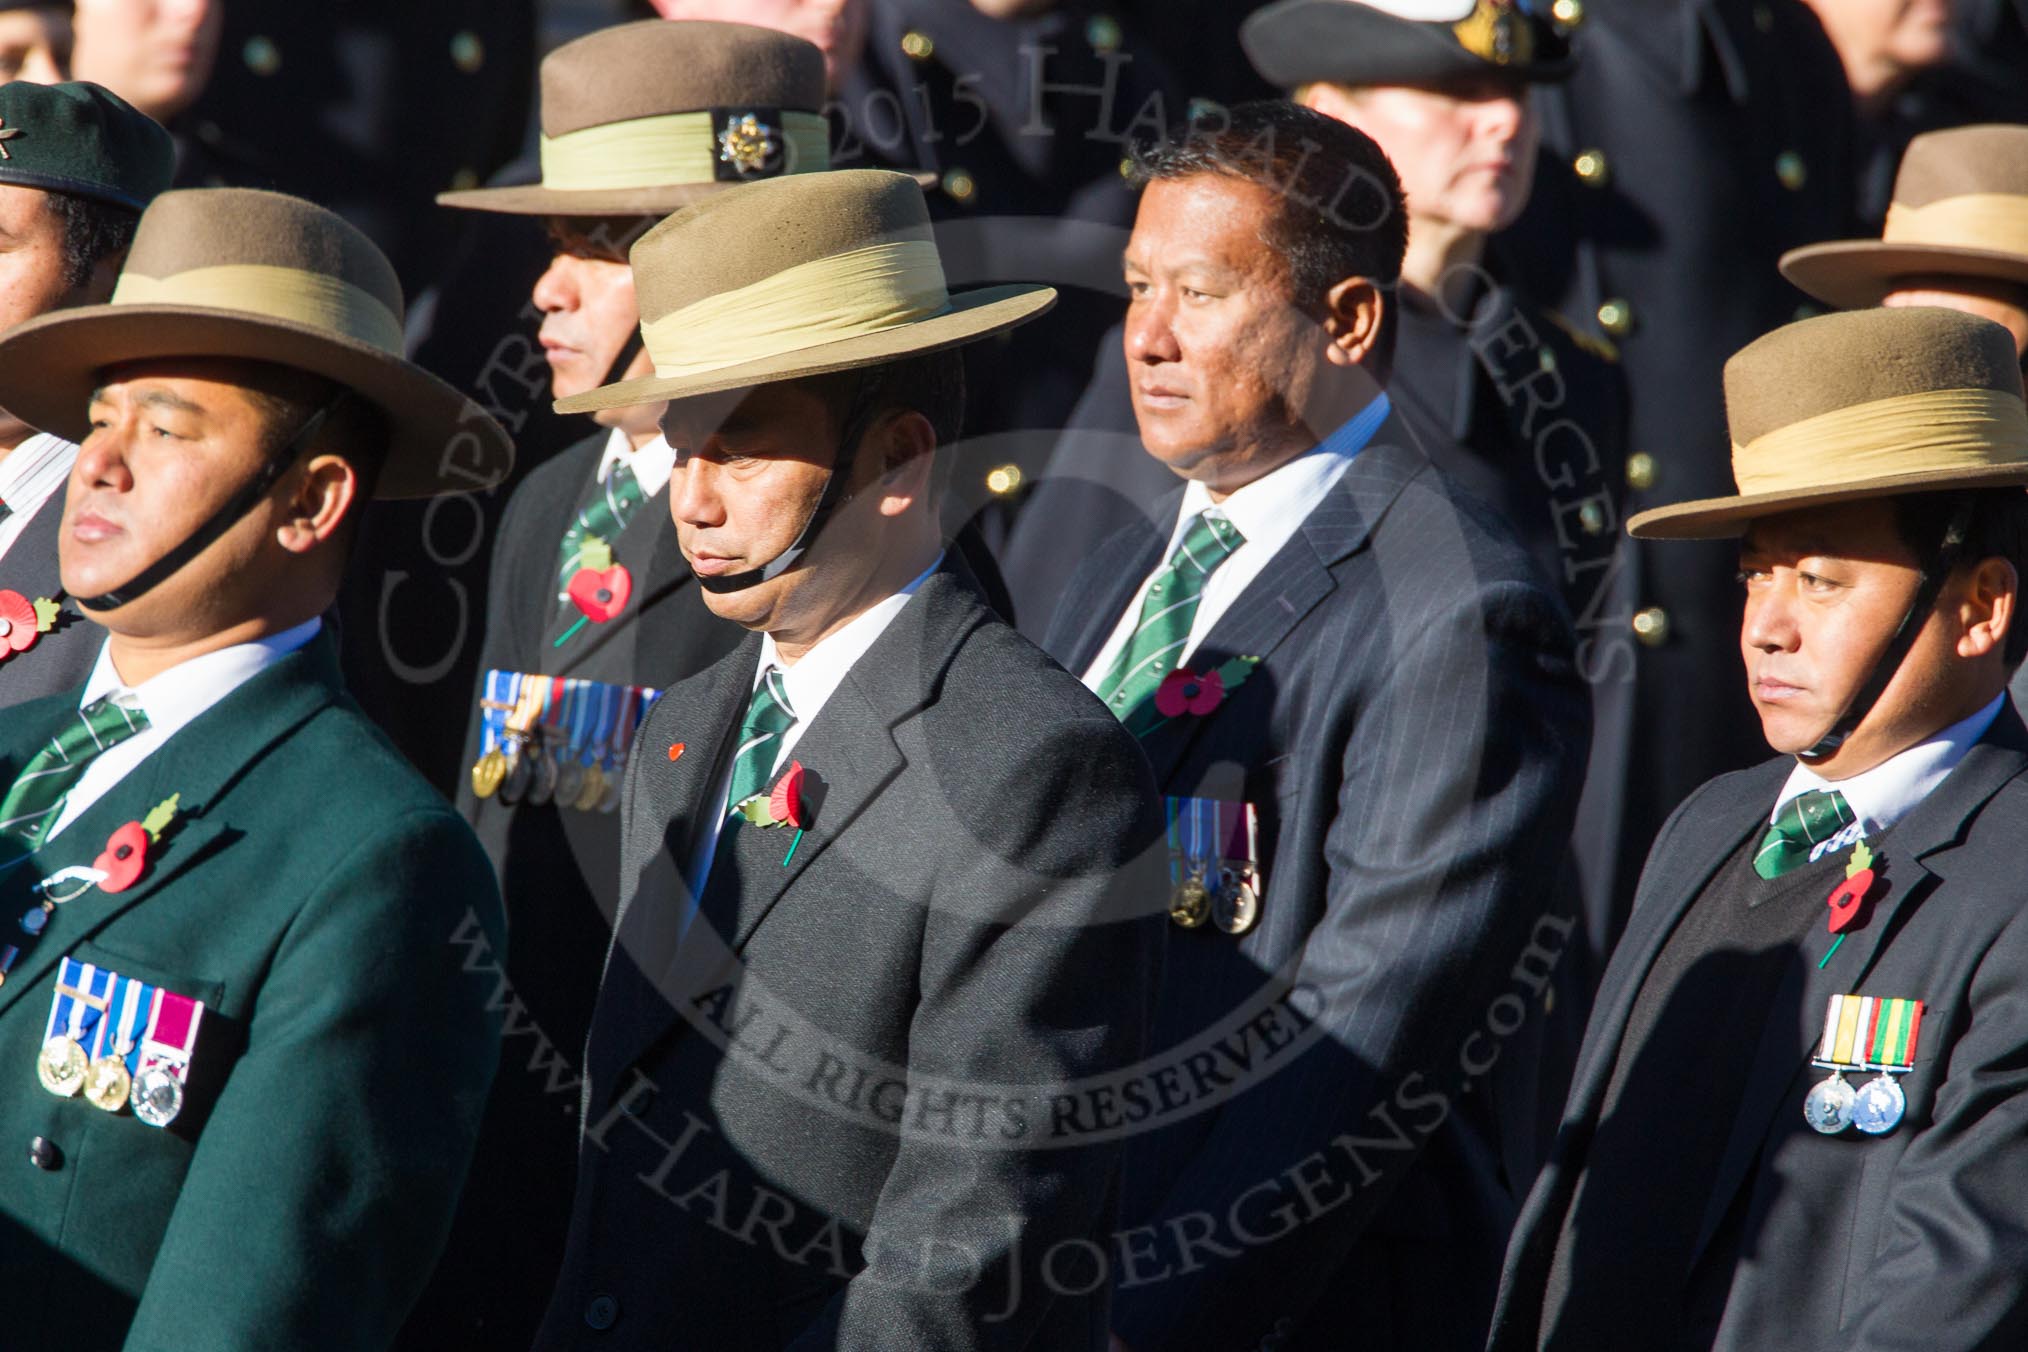 Remembrance Sunday Cenotaph March Past 2013: D2 - British Gurkha Welfare Association..
Press stand opposite the Foreign Office building, Whitehall, London SW1,
London,
Greater London,
United Kingdom,
on 10 November 2013 at 11:38, image #41